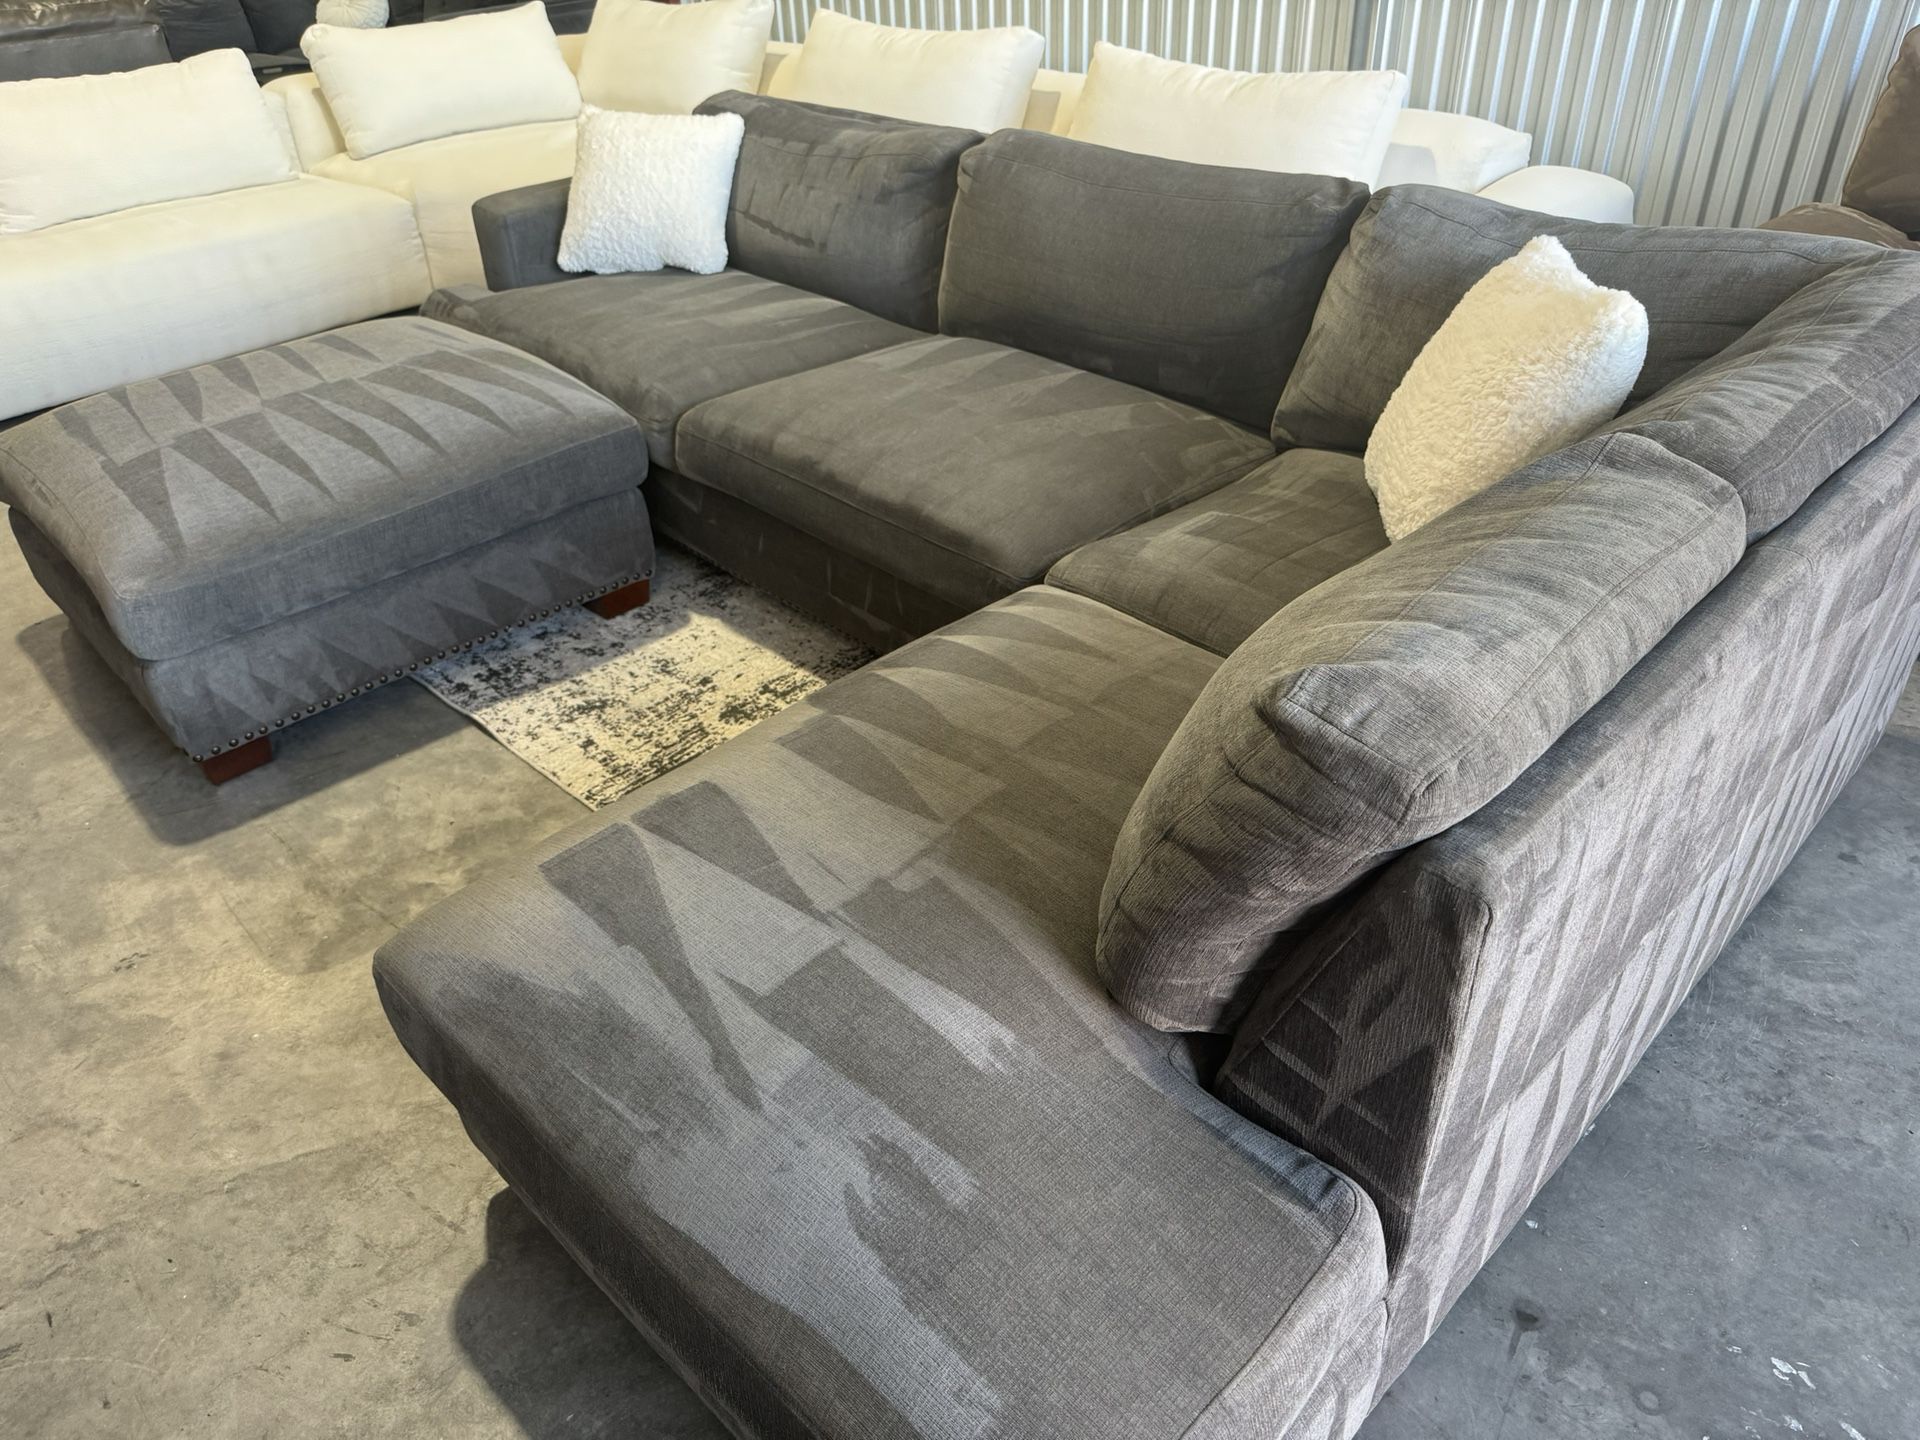 Free Delivery* Like New Gray Sectional W/ Ottoman